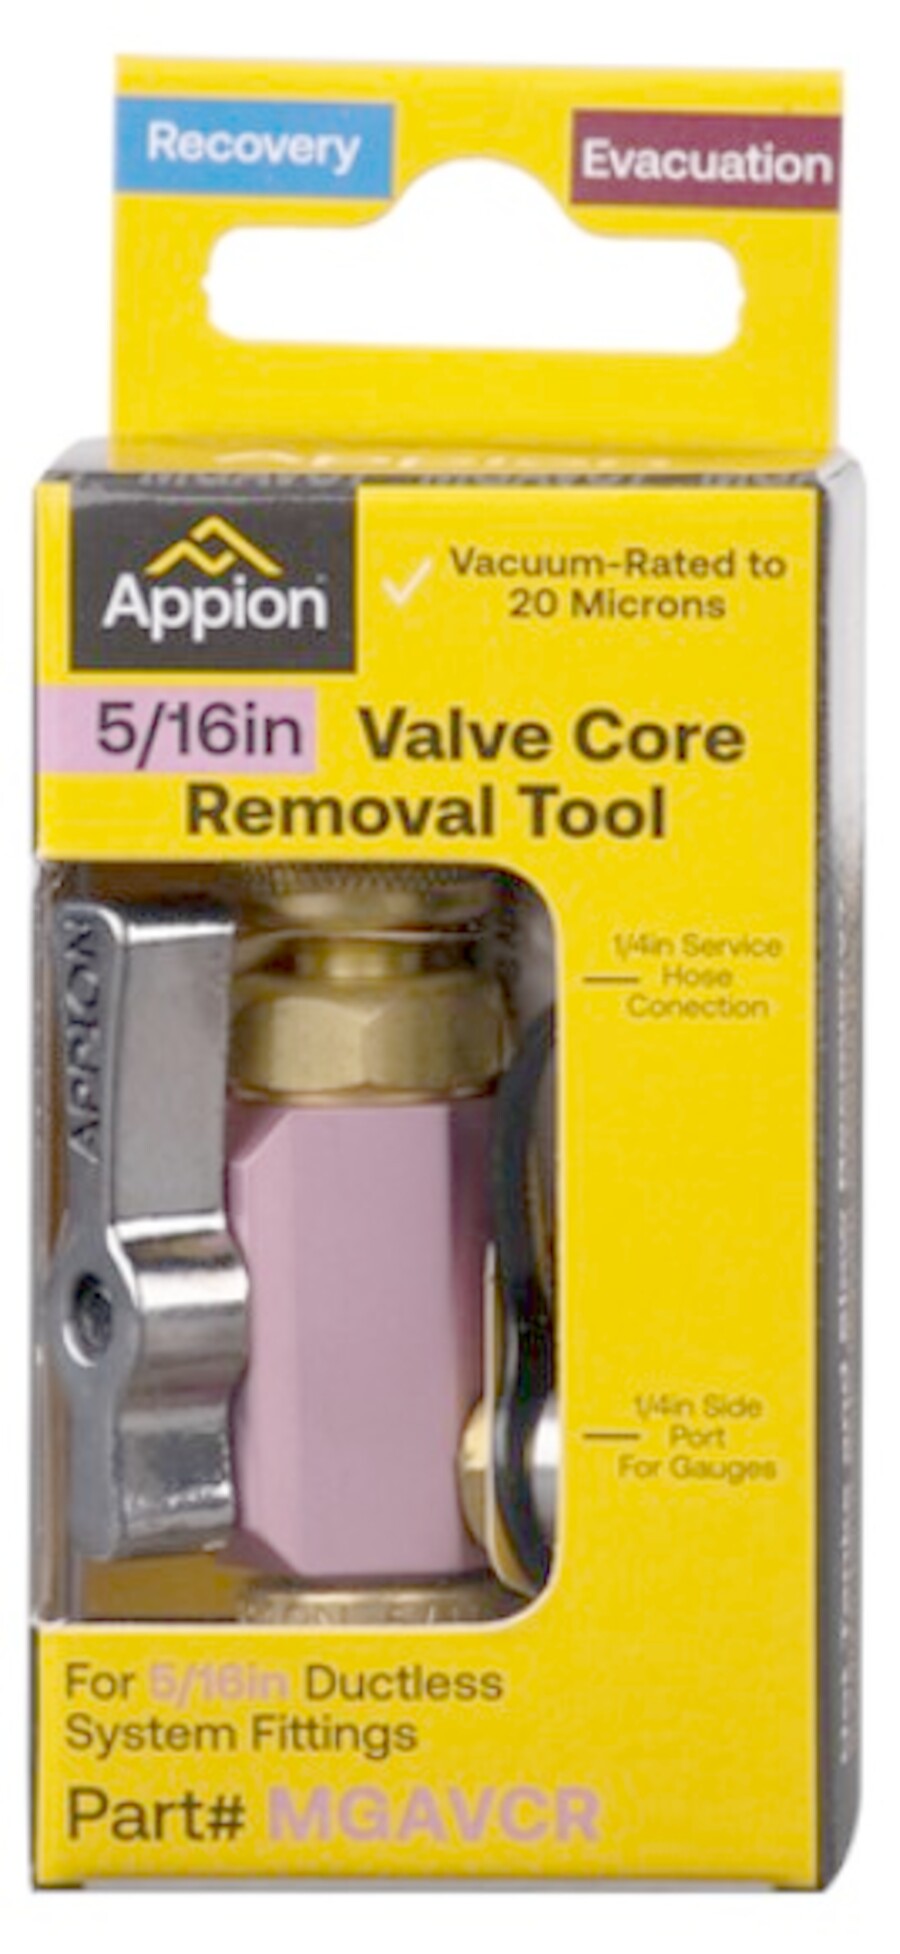 Appion - 5/16in Valve Core Removal Tool - Kirby